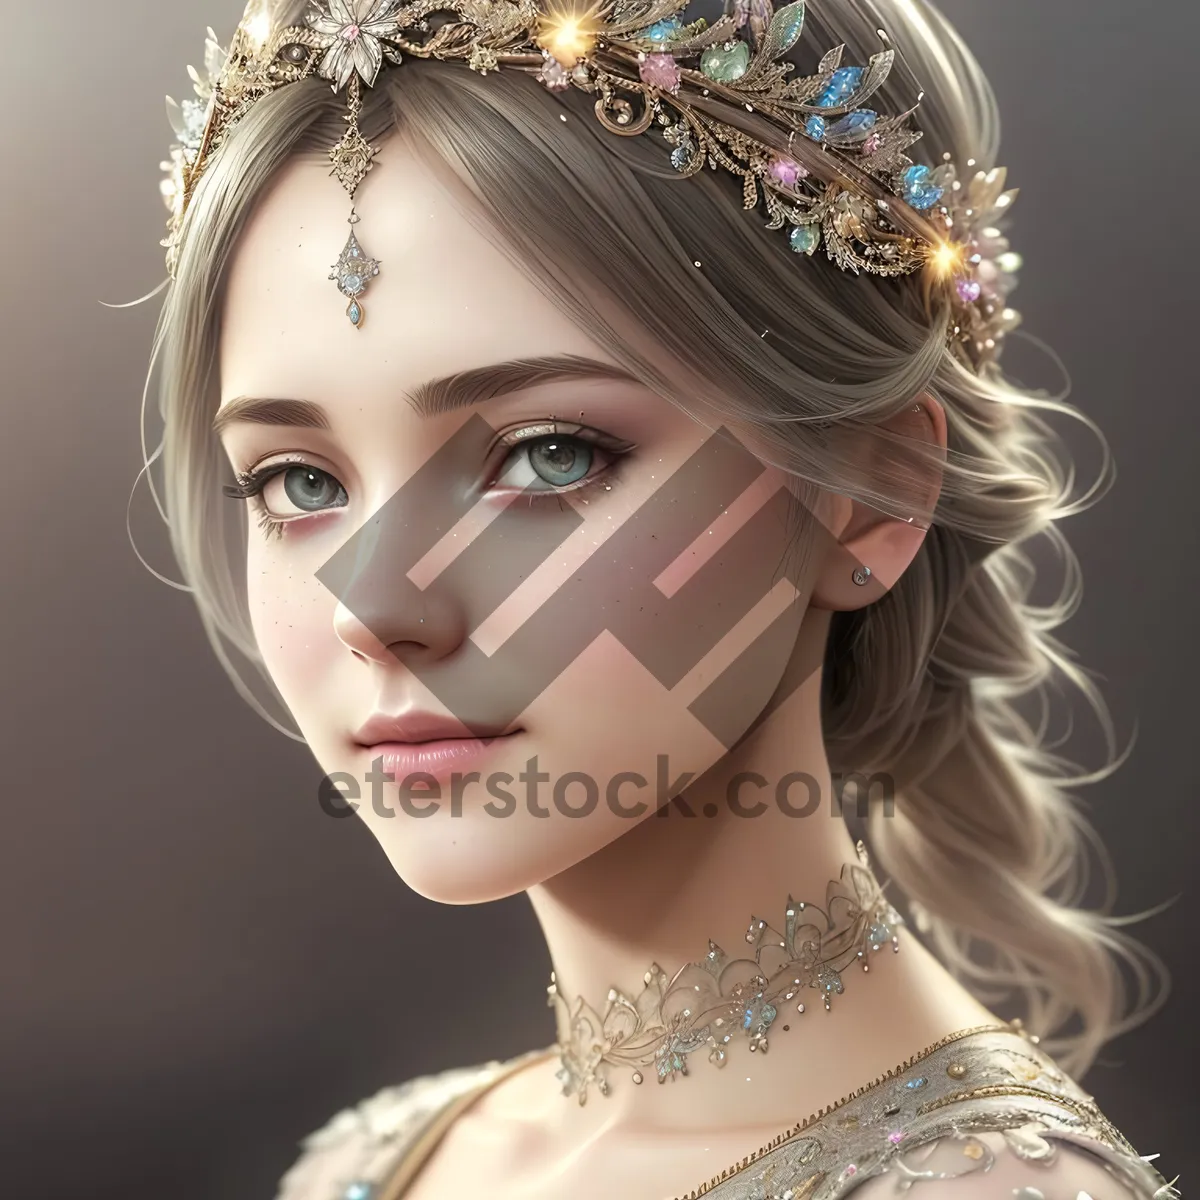 Picture of Regal Beauty: Princess in Crown Jewels